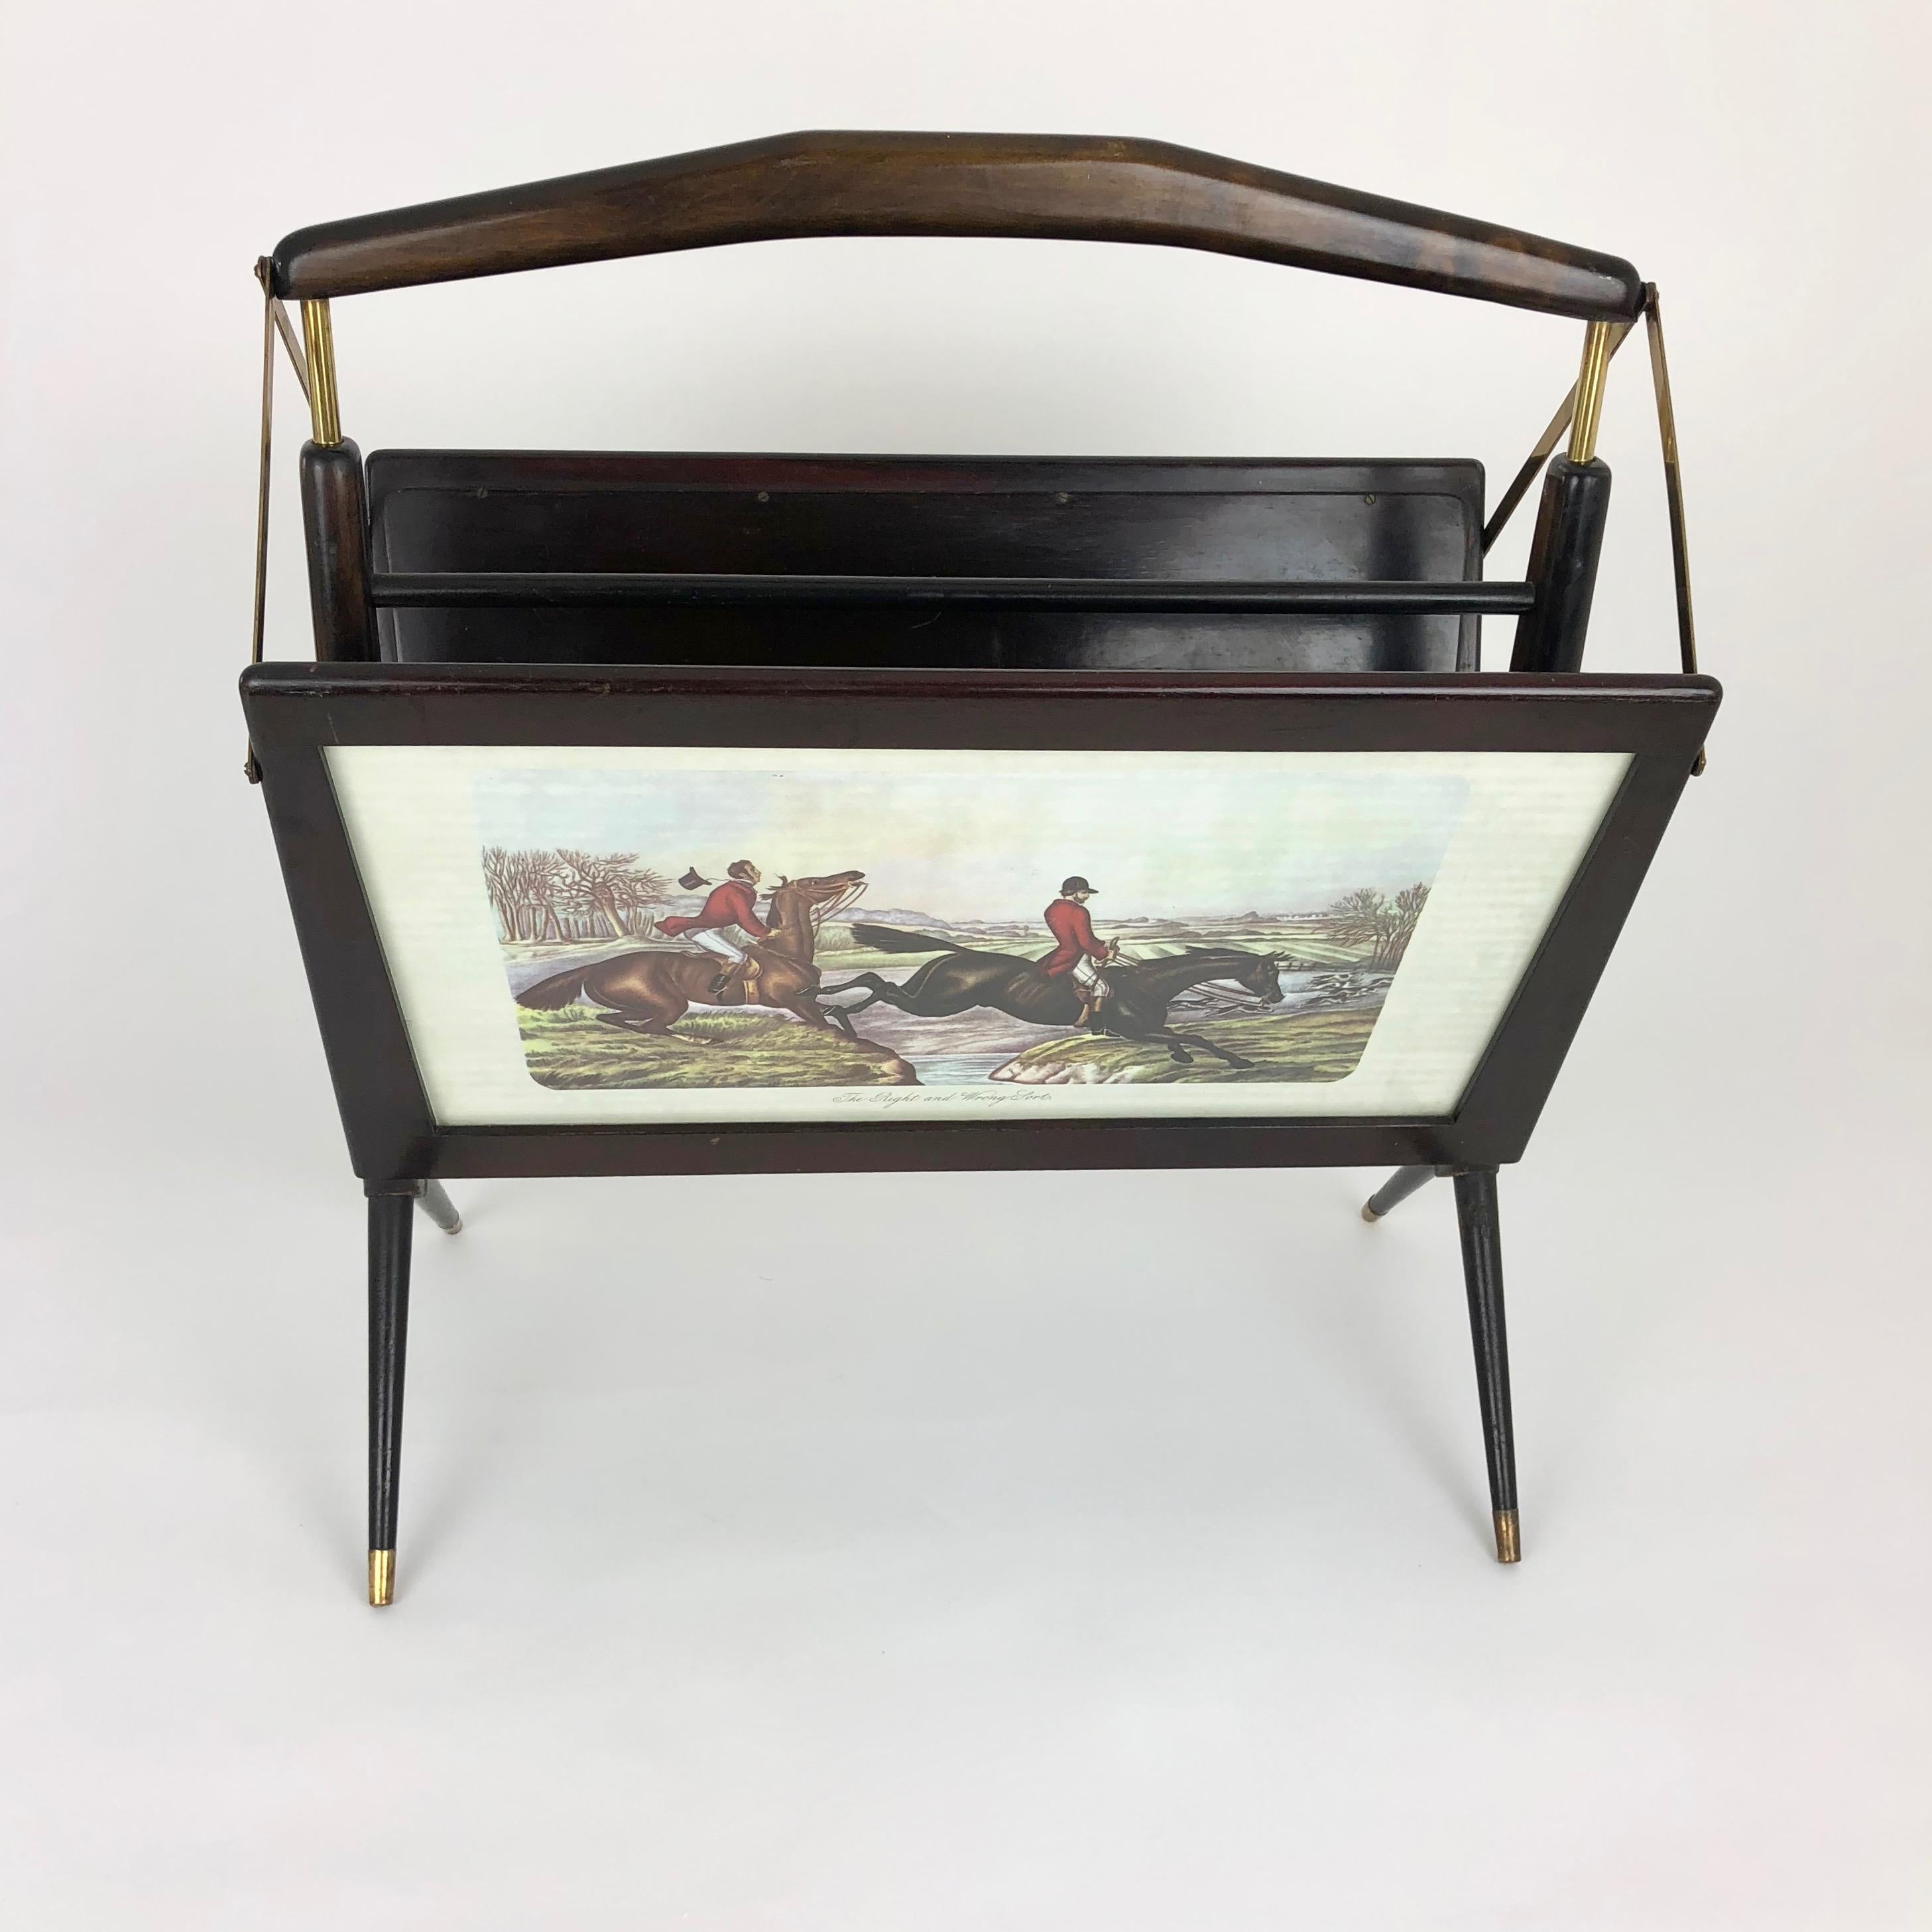 1950s foldable magazine rack in stained beechwood and brass detailing. Features men hunting on horses scenes on each side posted behind glass.